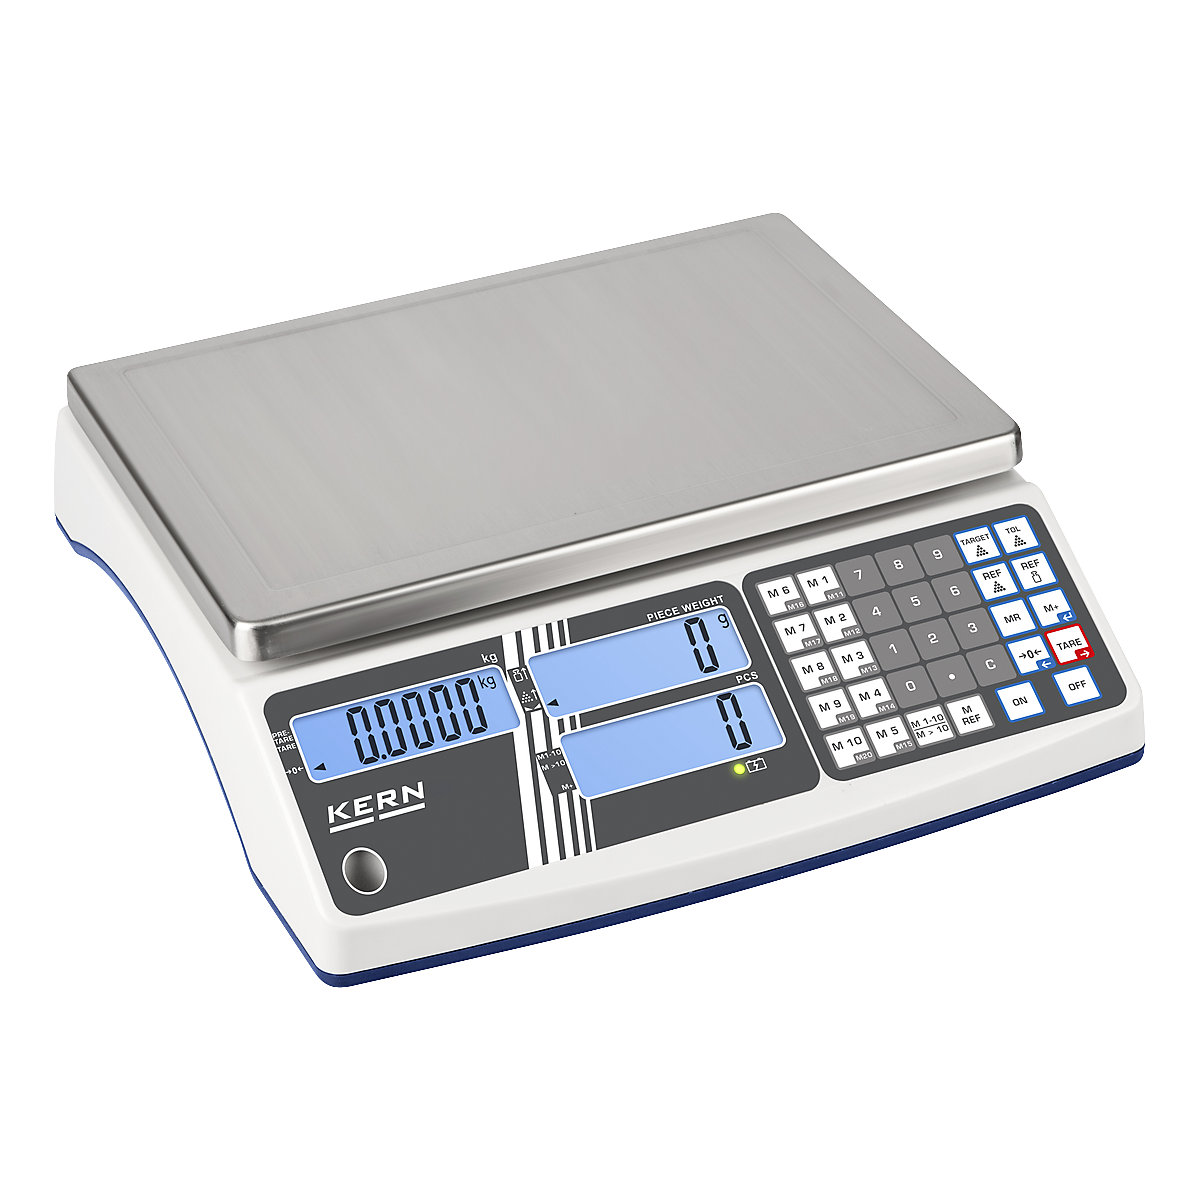 Counting scales – KERN, robust model, weighing range 15 kg, read-out accuracy 1 g-3